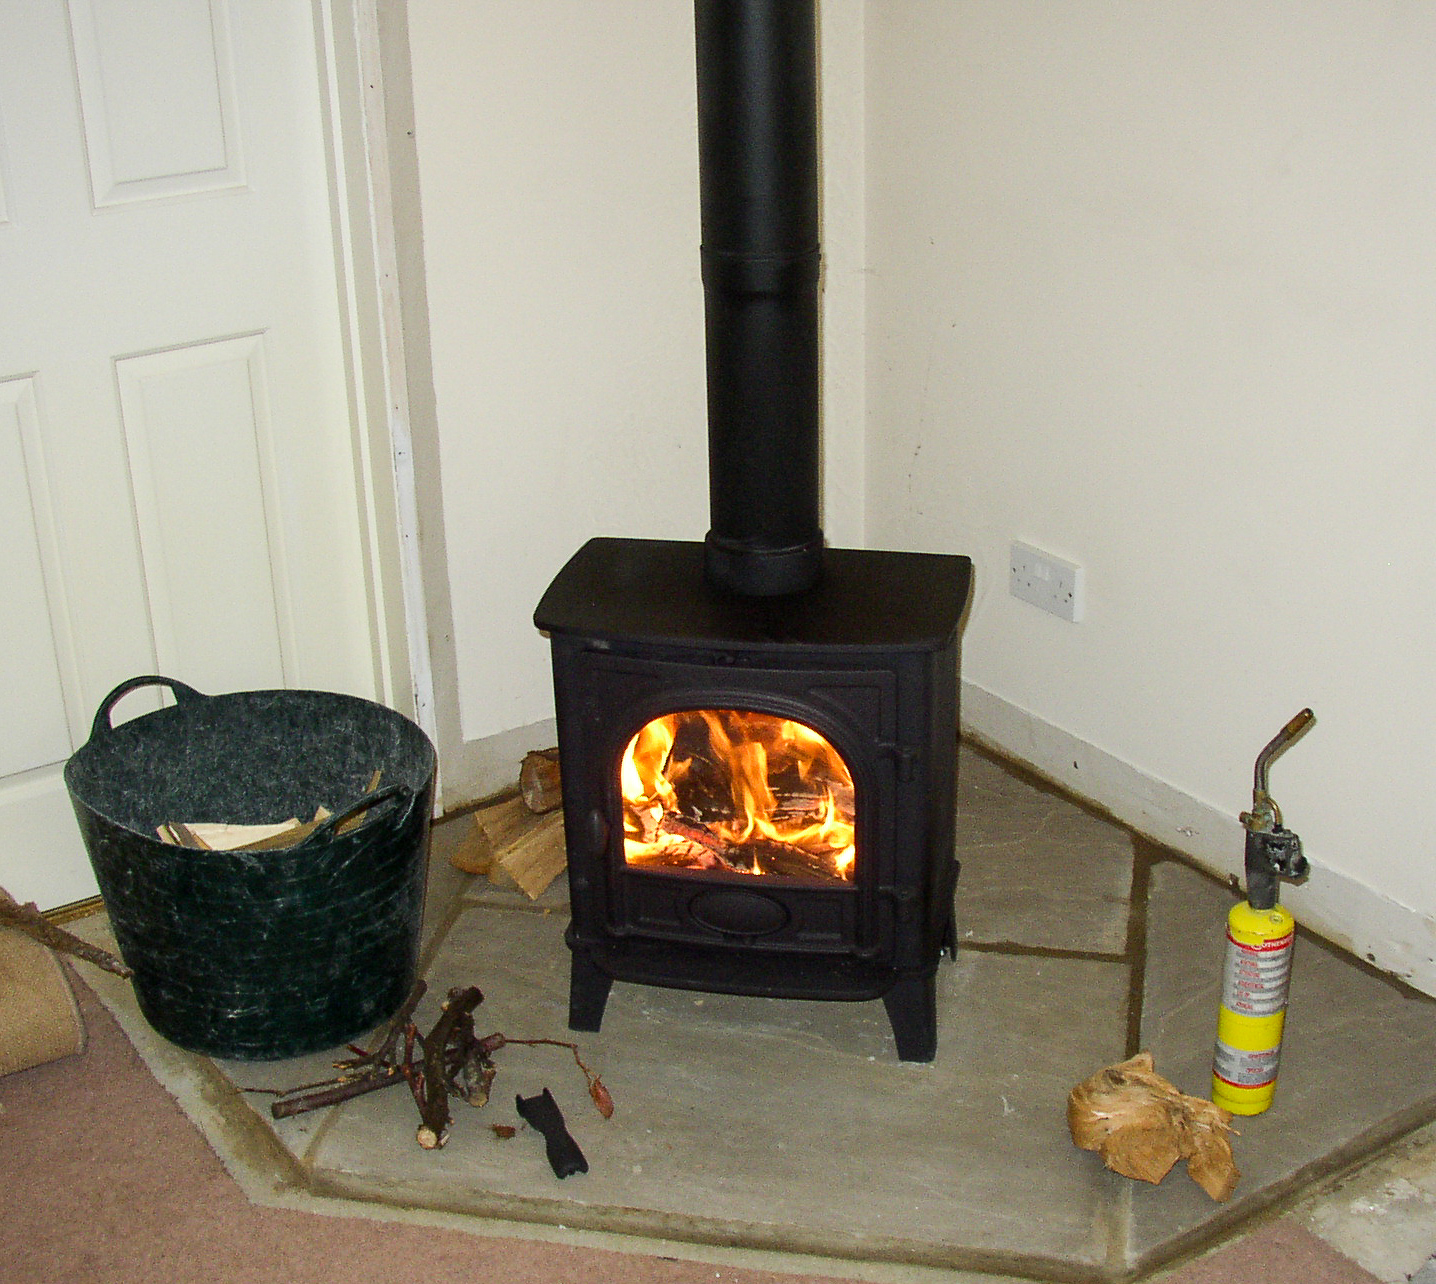 Installing and testing the wood burner